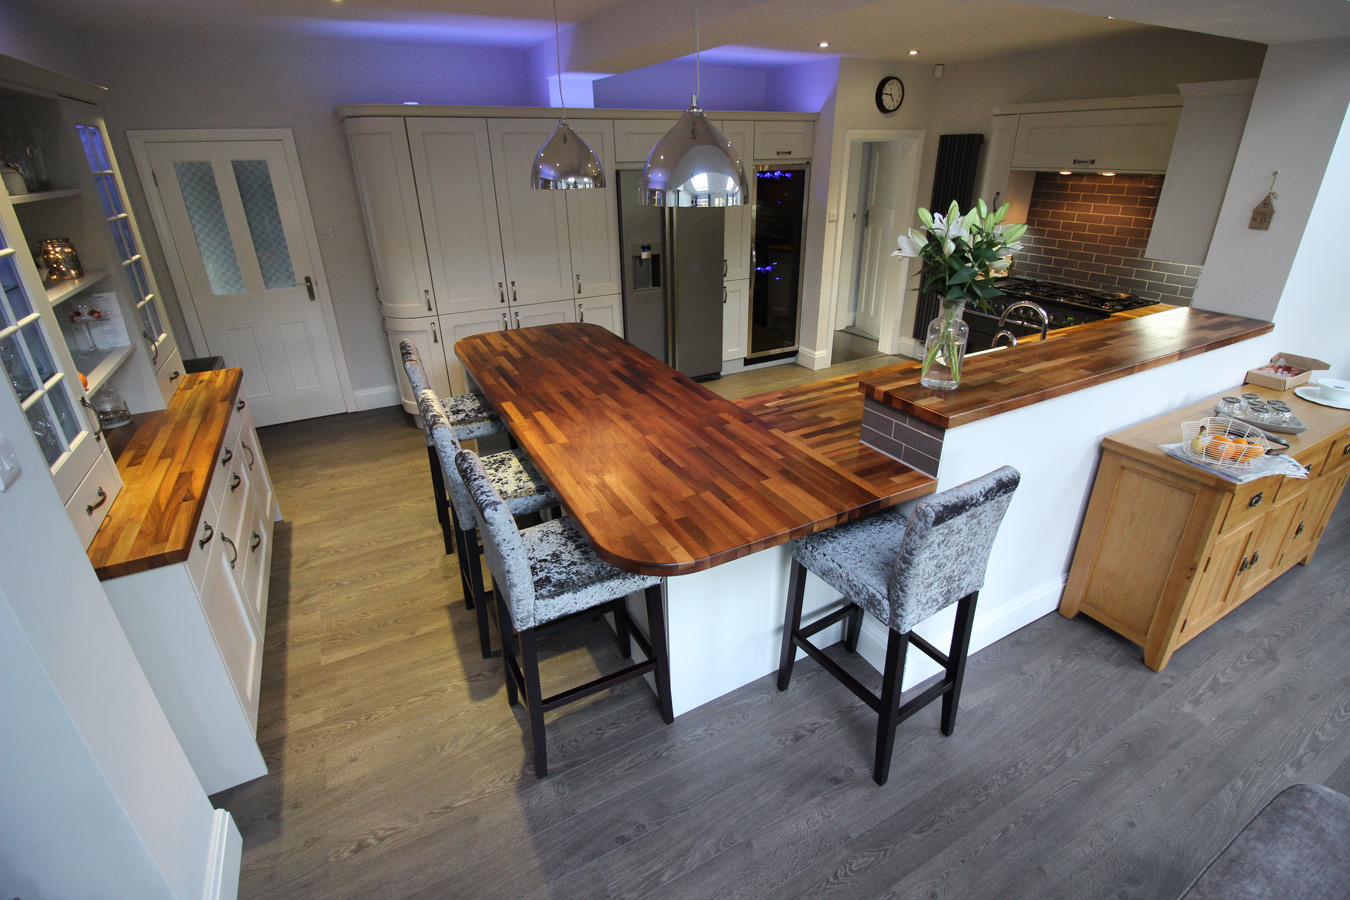 Mr & Mrs Oxer - Leeds : Cheap Kitchen Units and Cabinets for Sale ...